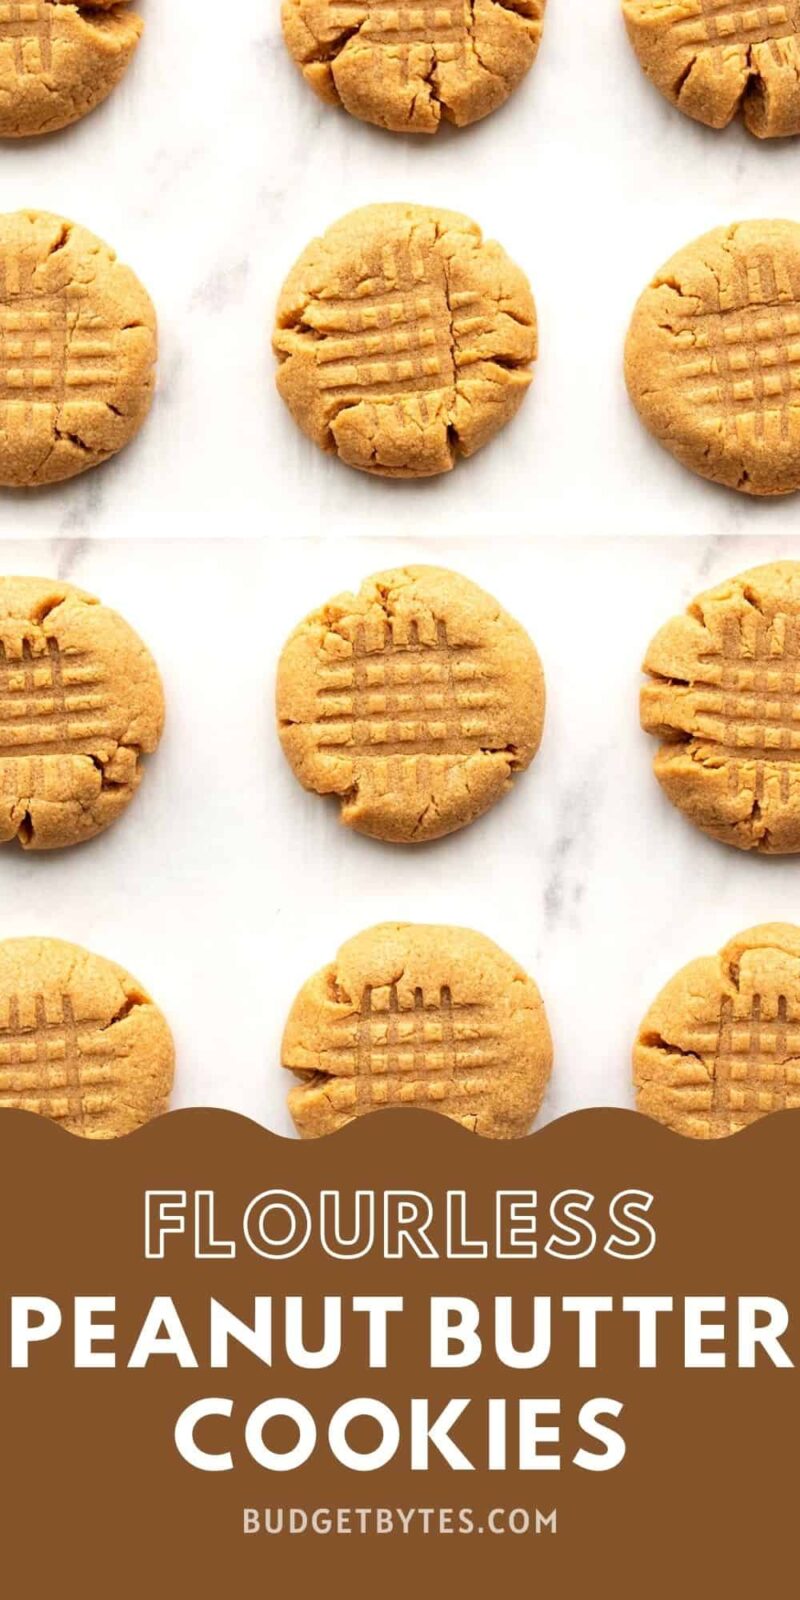 peanut butter cookies lined up on parchment paper, title text at the bottom.